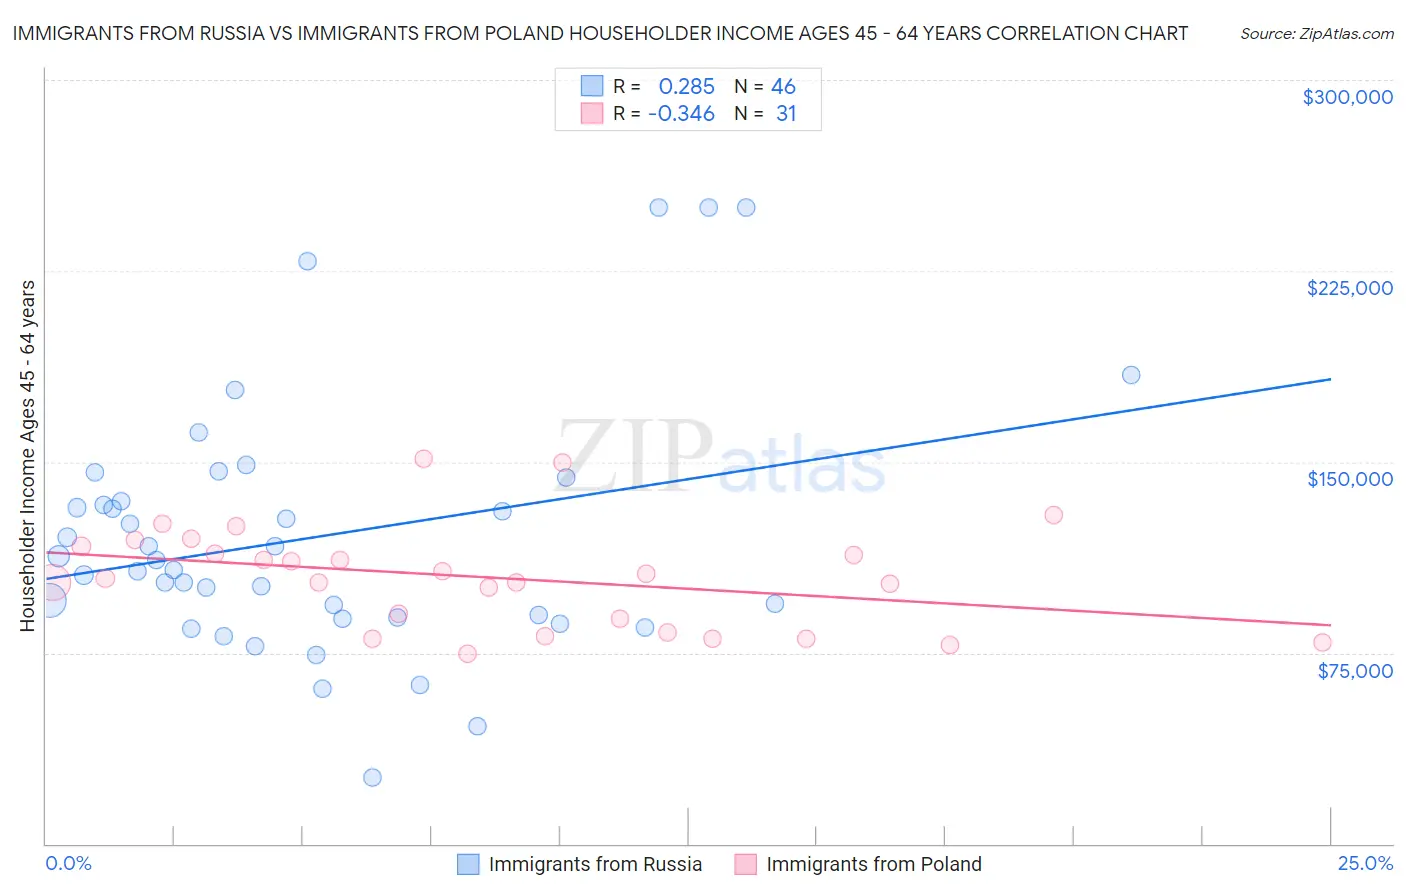 Immigrants from Russia vs Immigrants from Poland Householder Income Ages 45 - 64 years